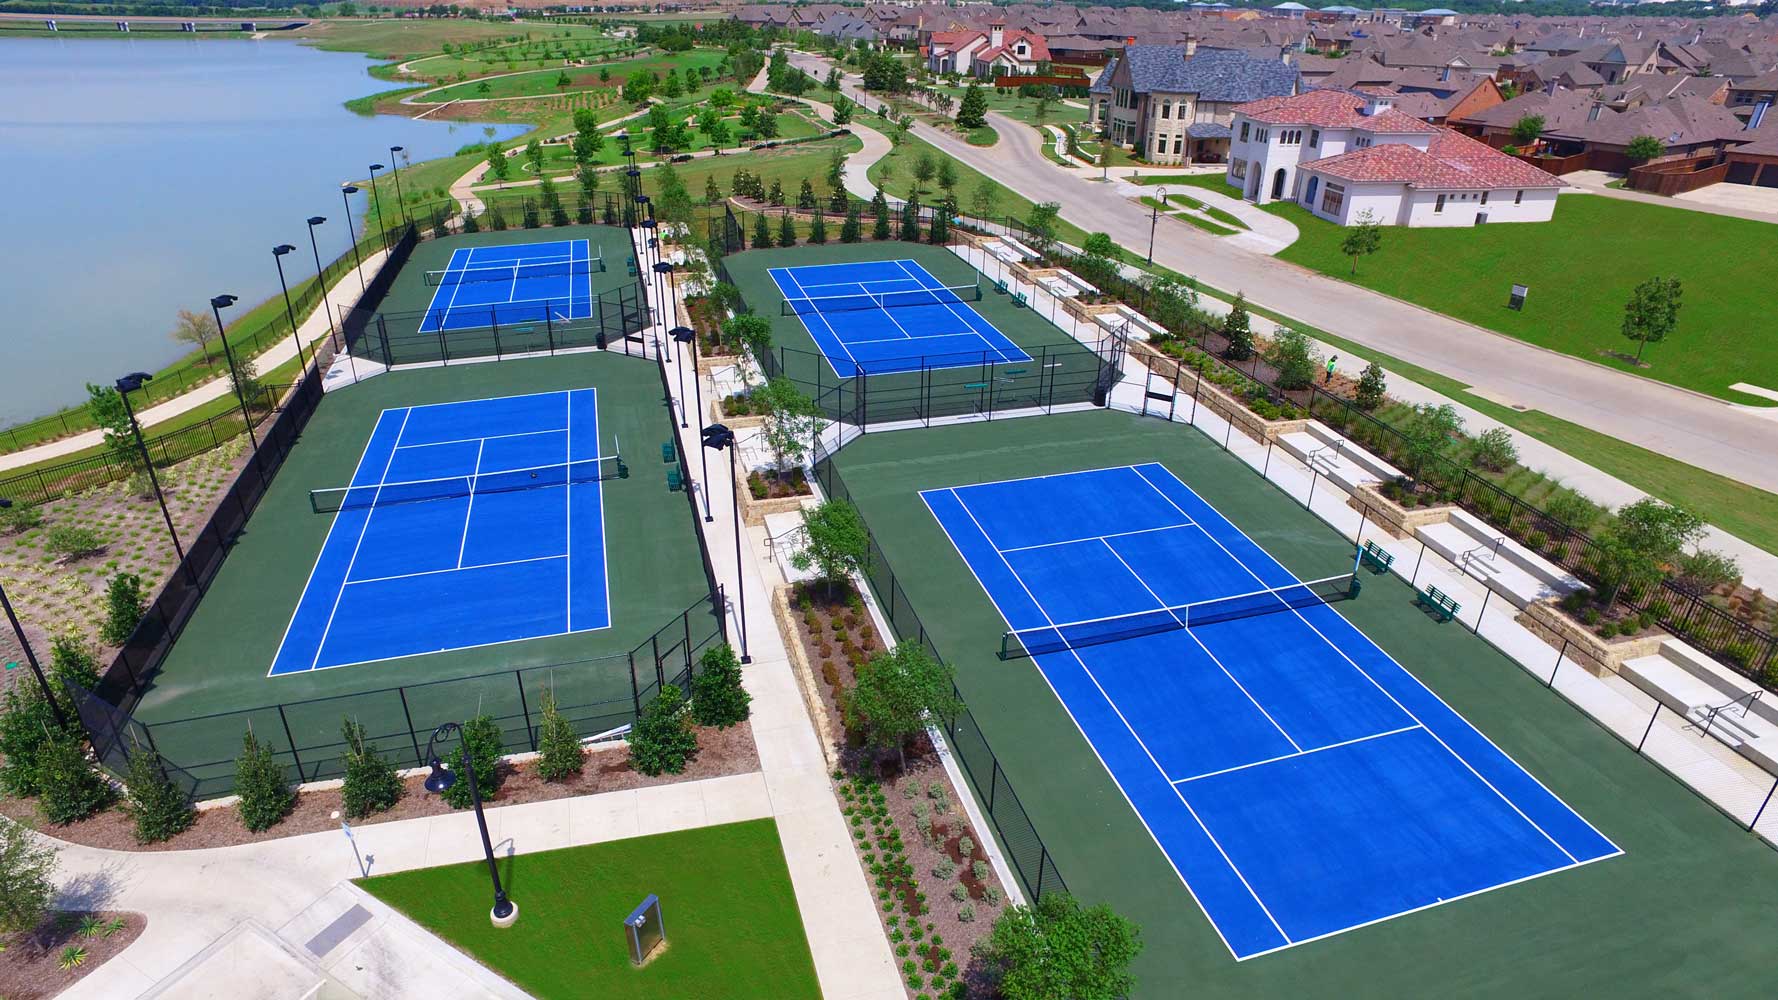 Multiple Sports Courts